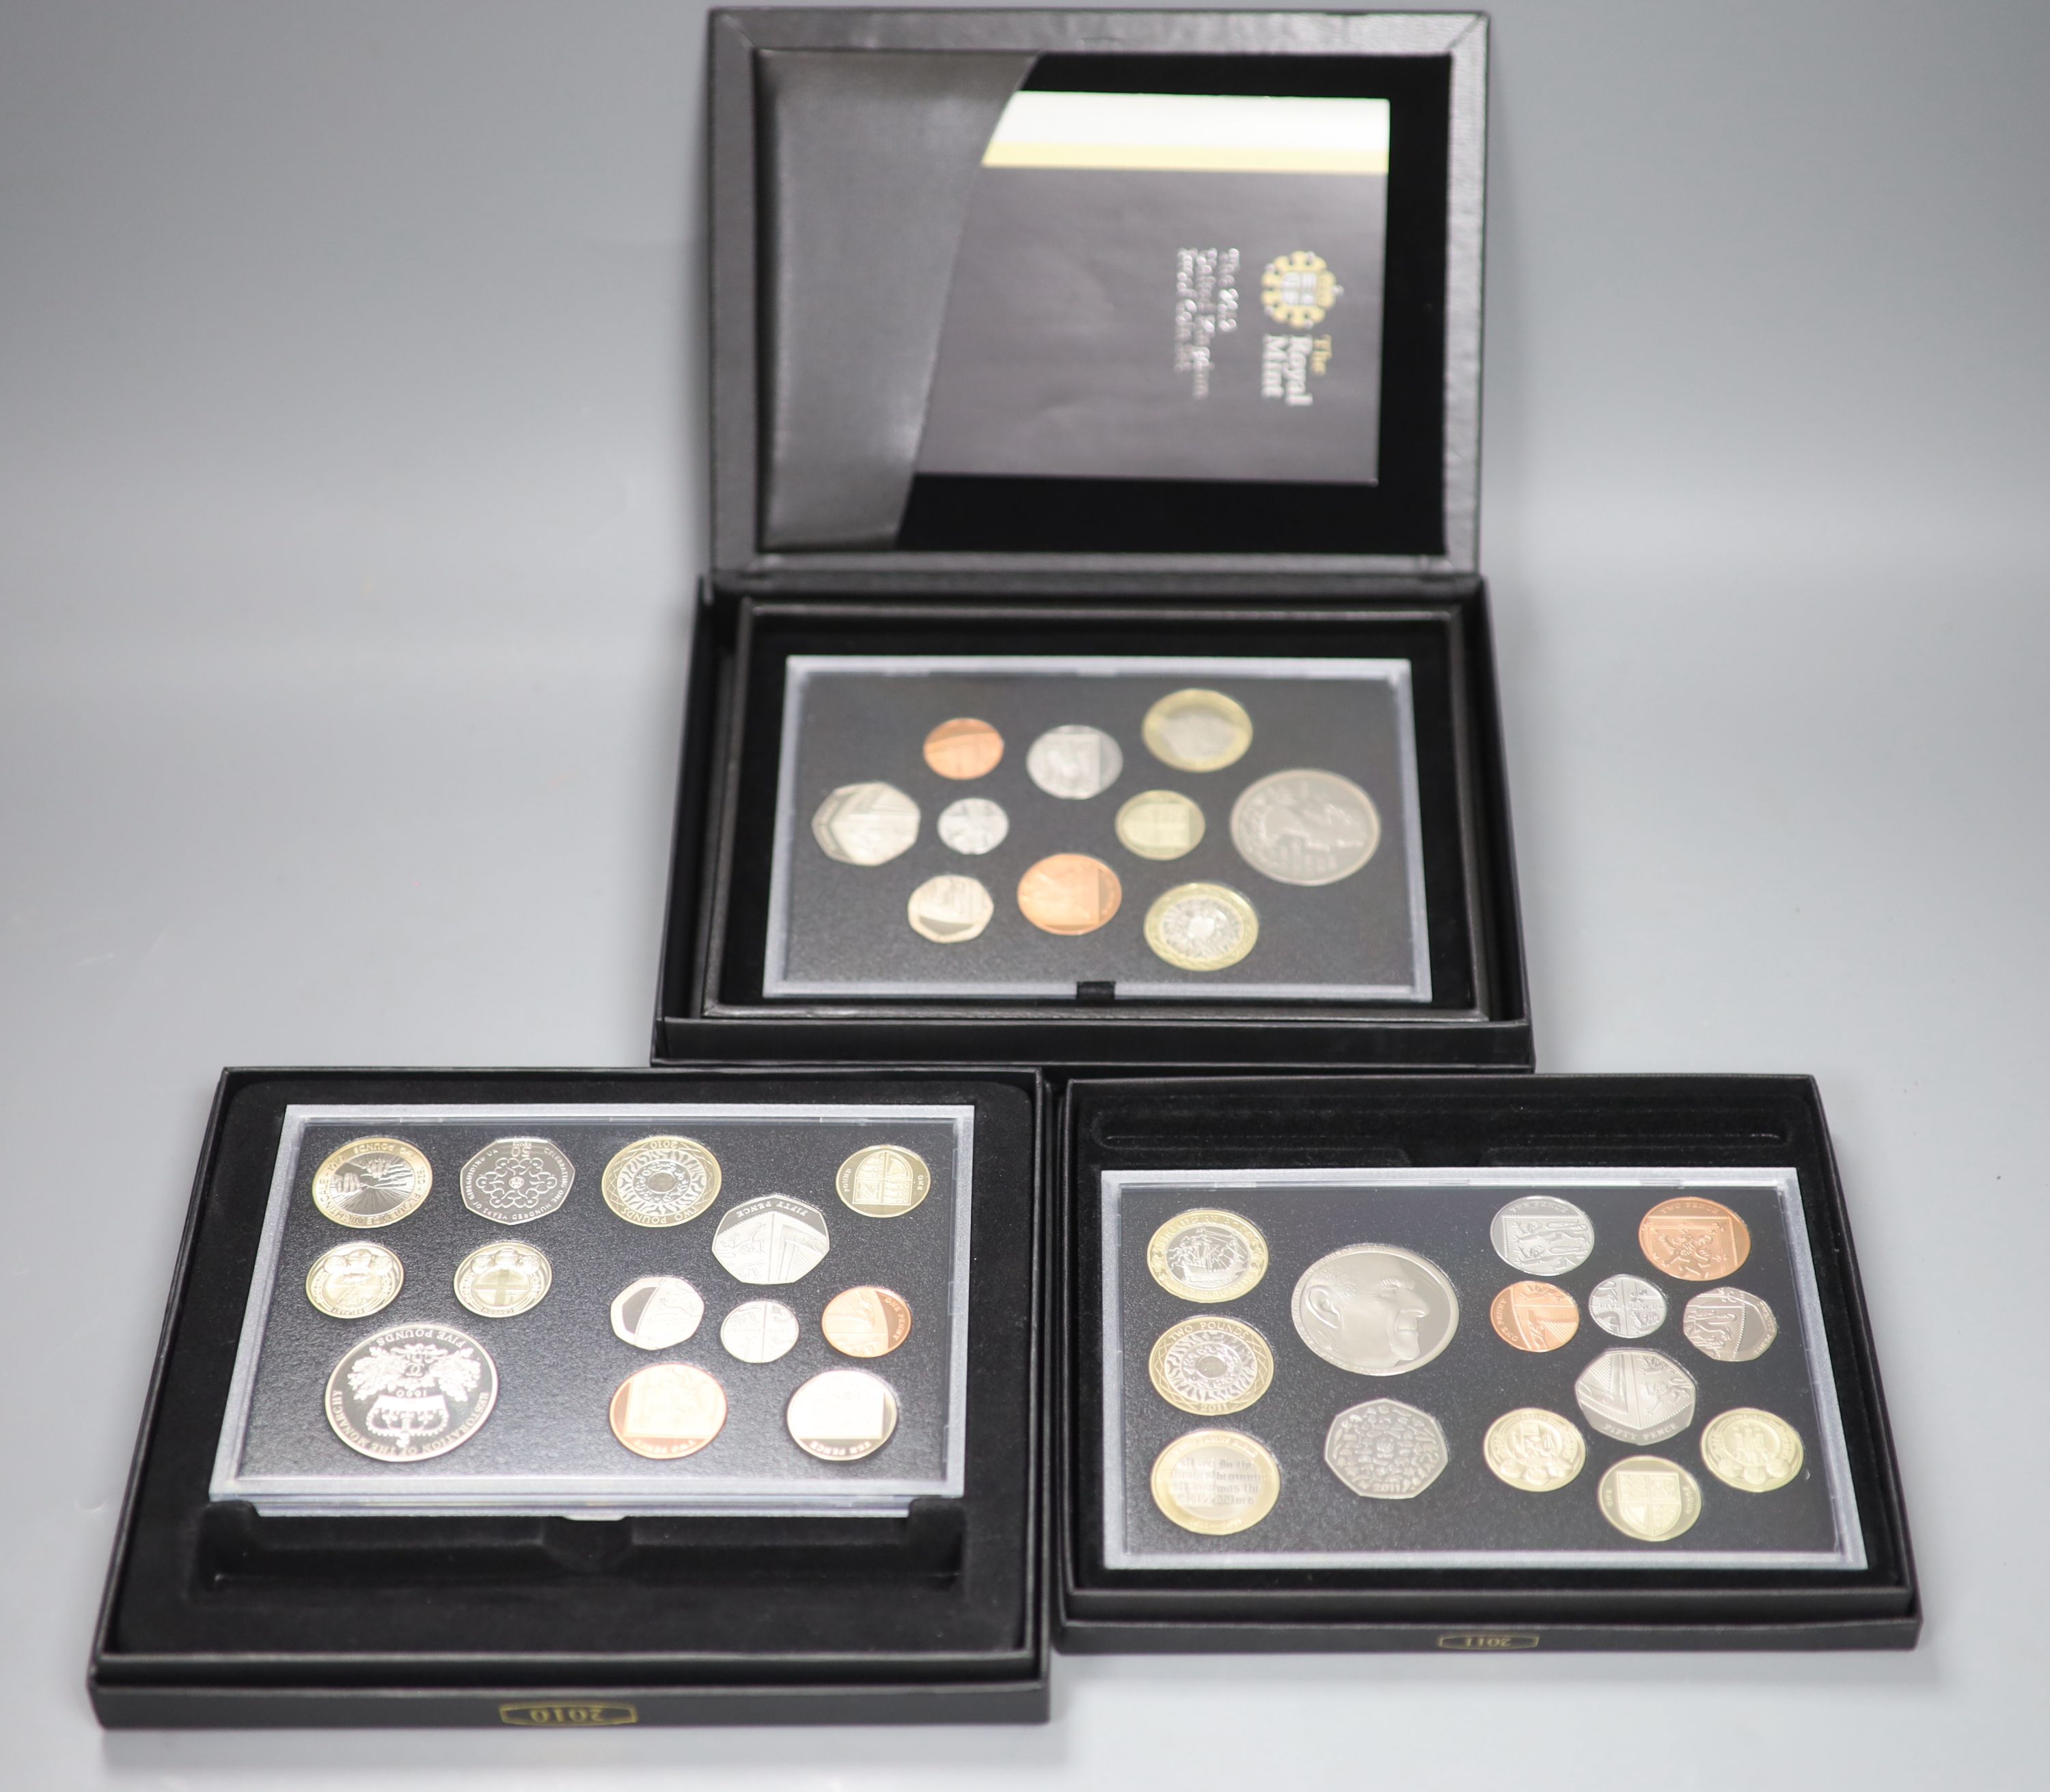 Three Royal Mint UK proof coin years sets; 2010, 2011 and 2012 together with other Royal Mint coins of EF grade or better (some possibl